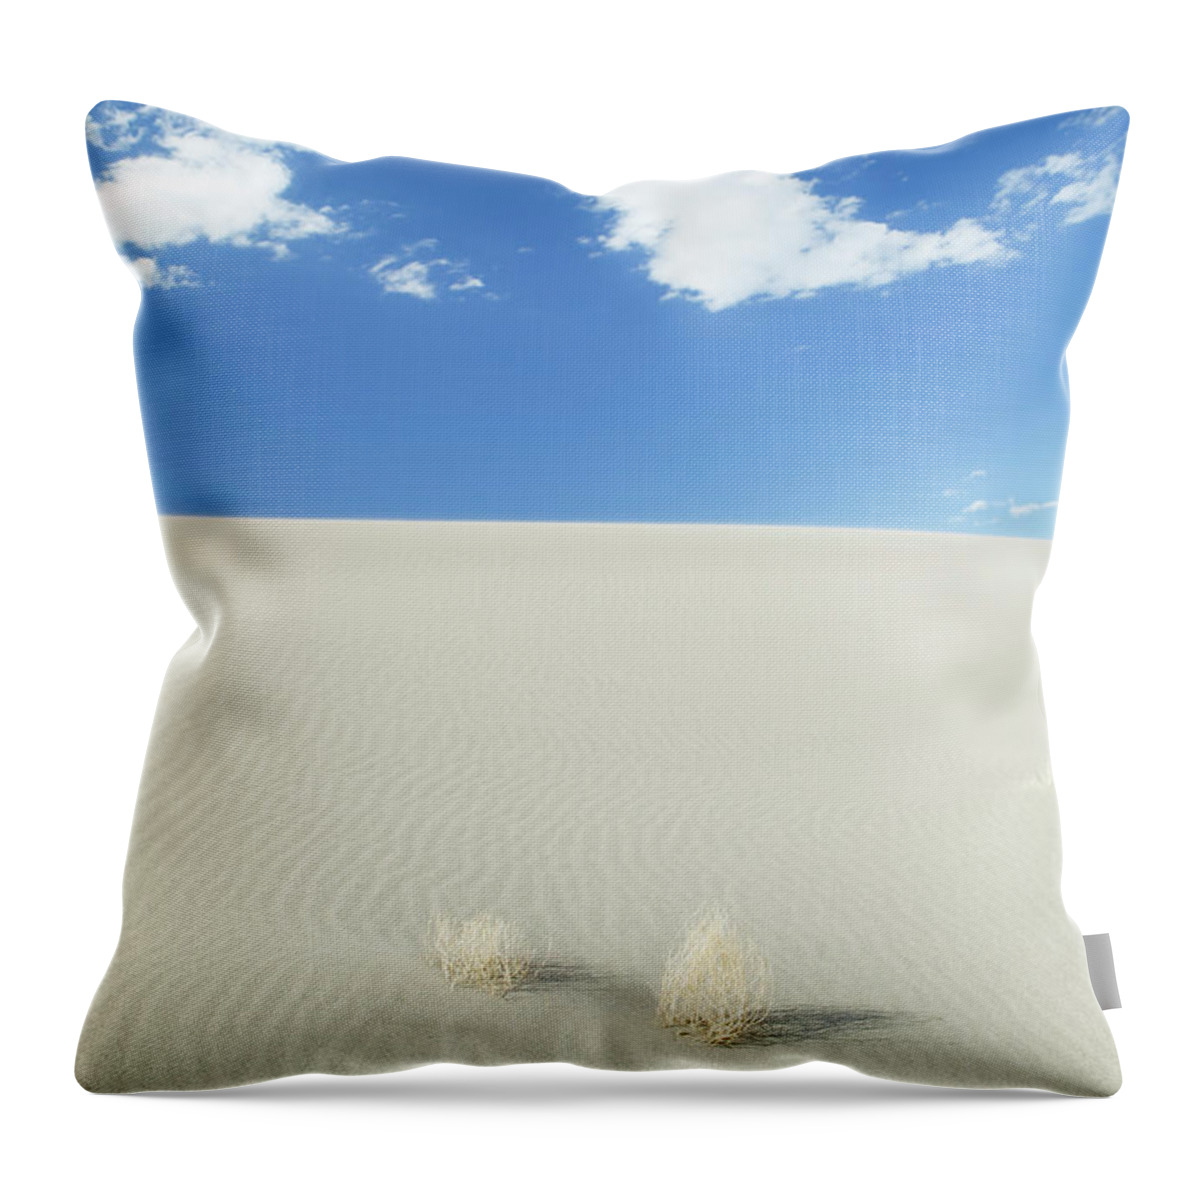 Sand Dune Throw Pillow featuring the photograph Blue Sky Over Sand Dune by Bryan Mullennix